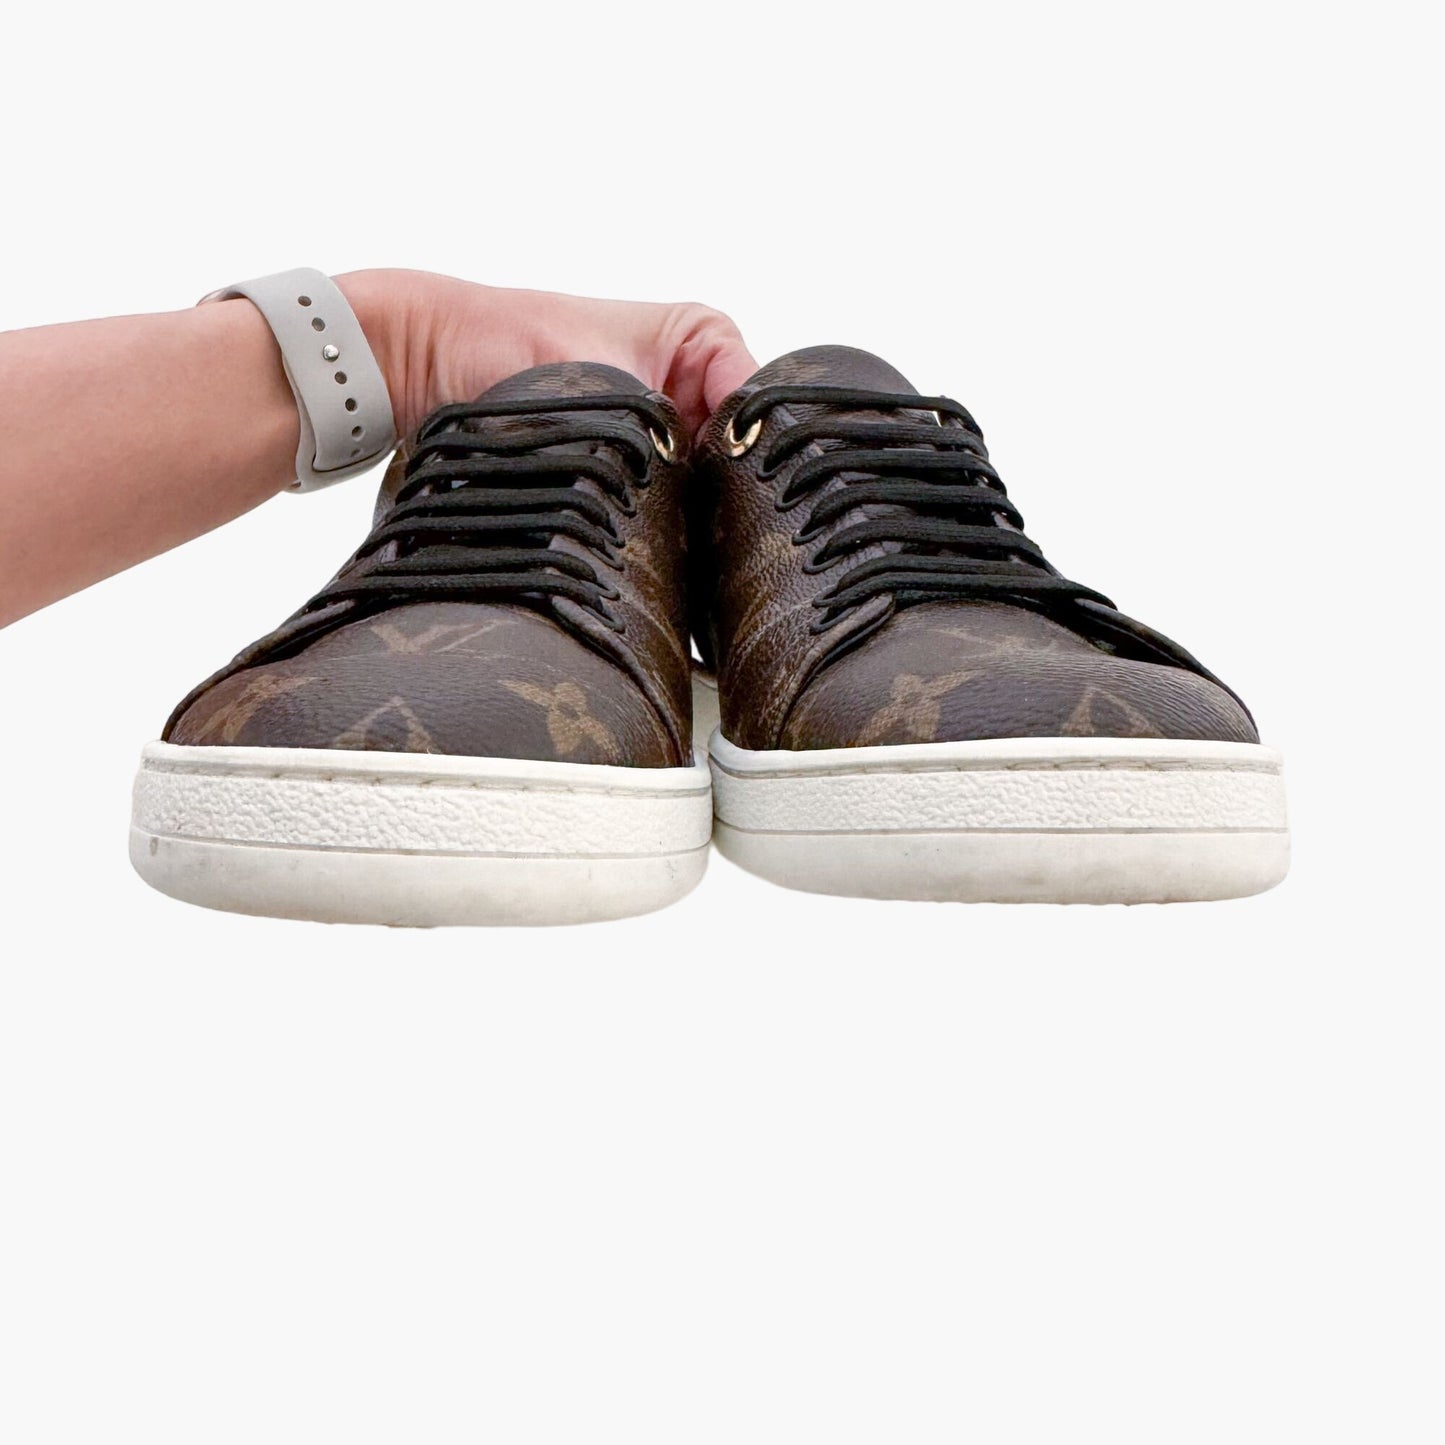 Louis Vuitton Frontrow Sneakers in Brown Monogram Size 40